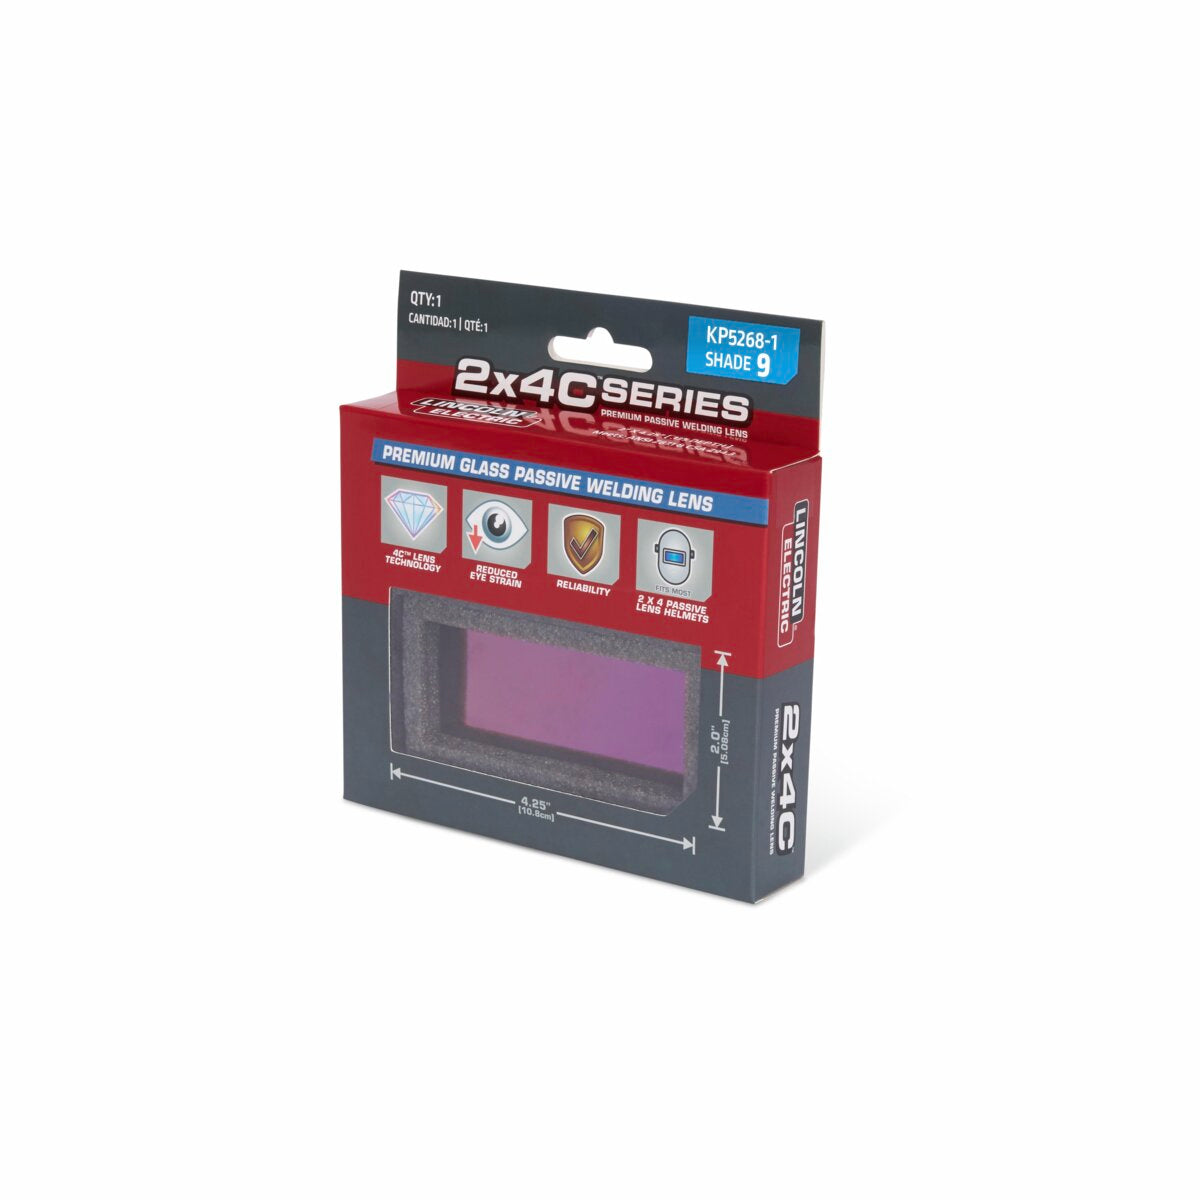 Lincoln Electric KP5268-1 2x4C® Series Premium Glass Passive Welding Lens - Shade 9